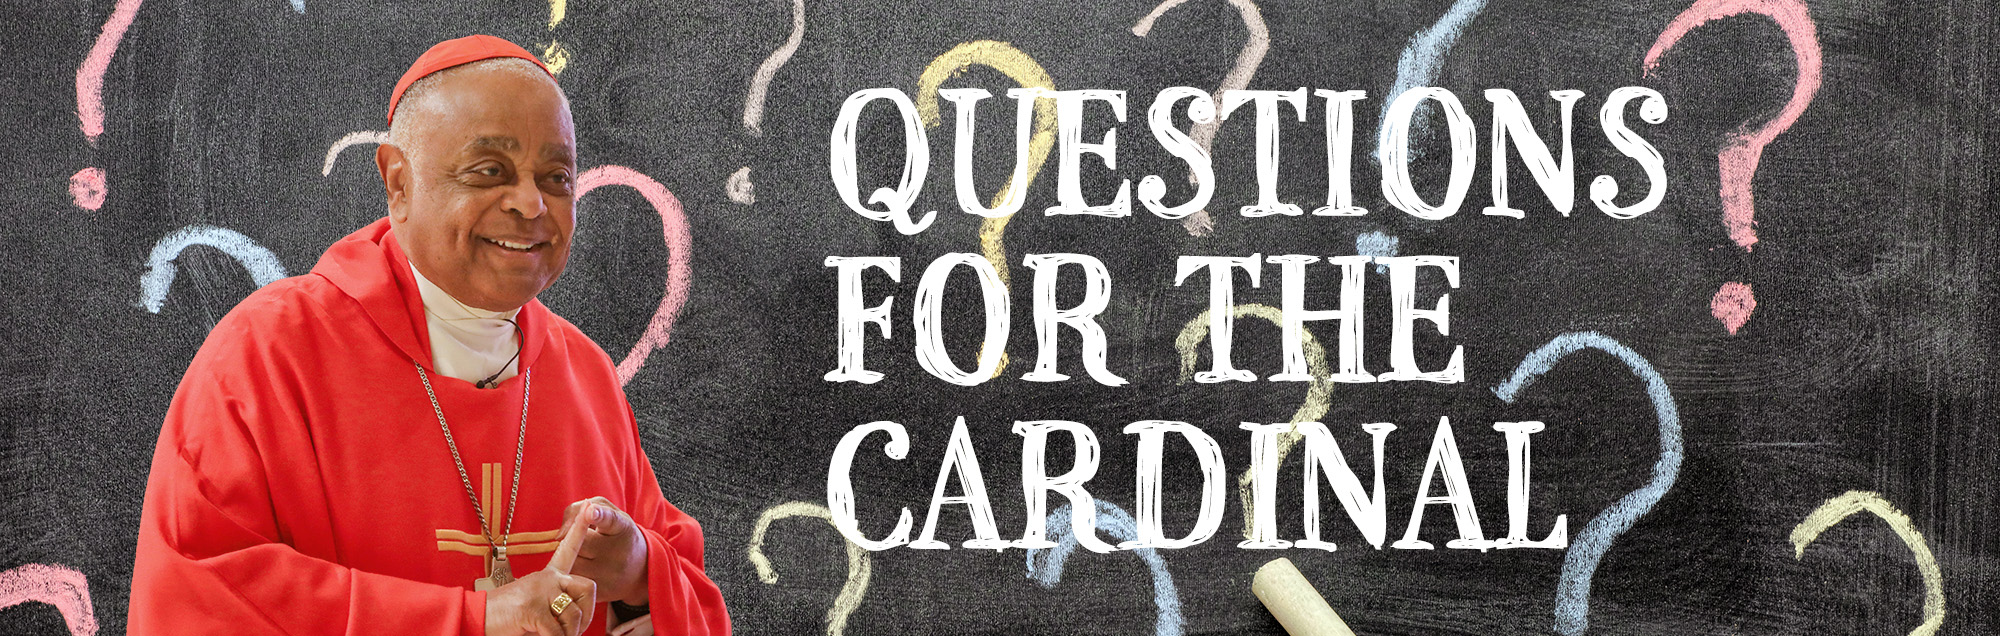 Questions for the Cardinal